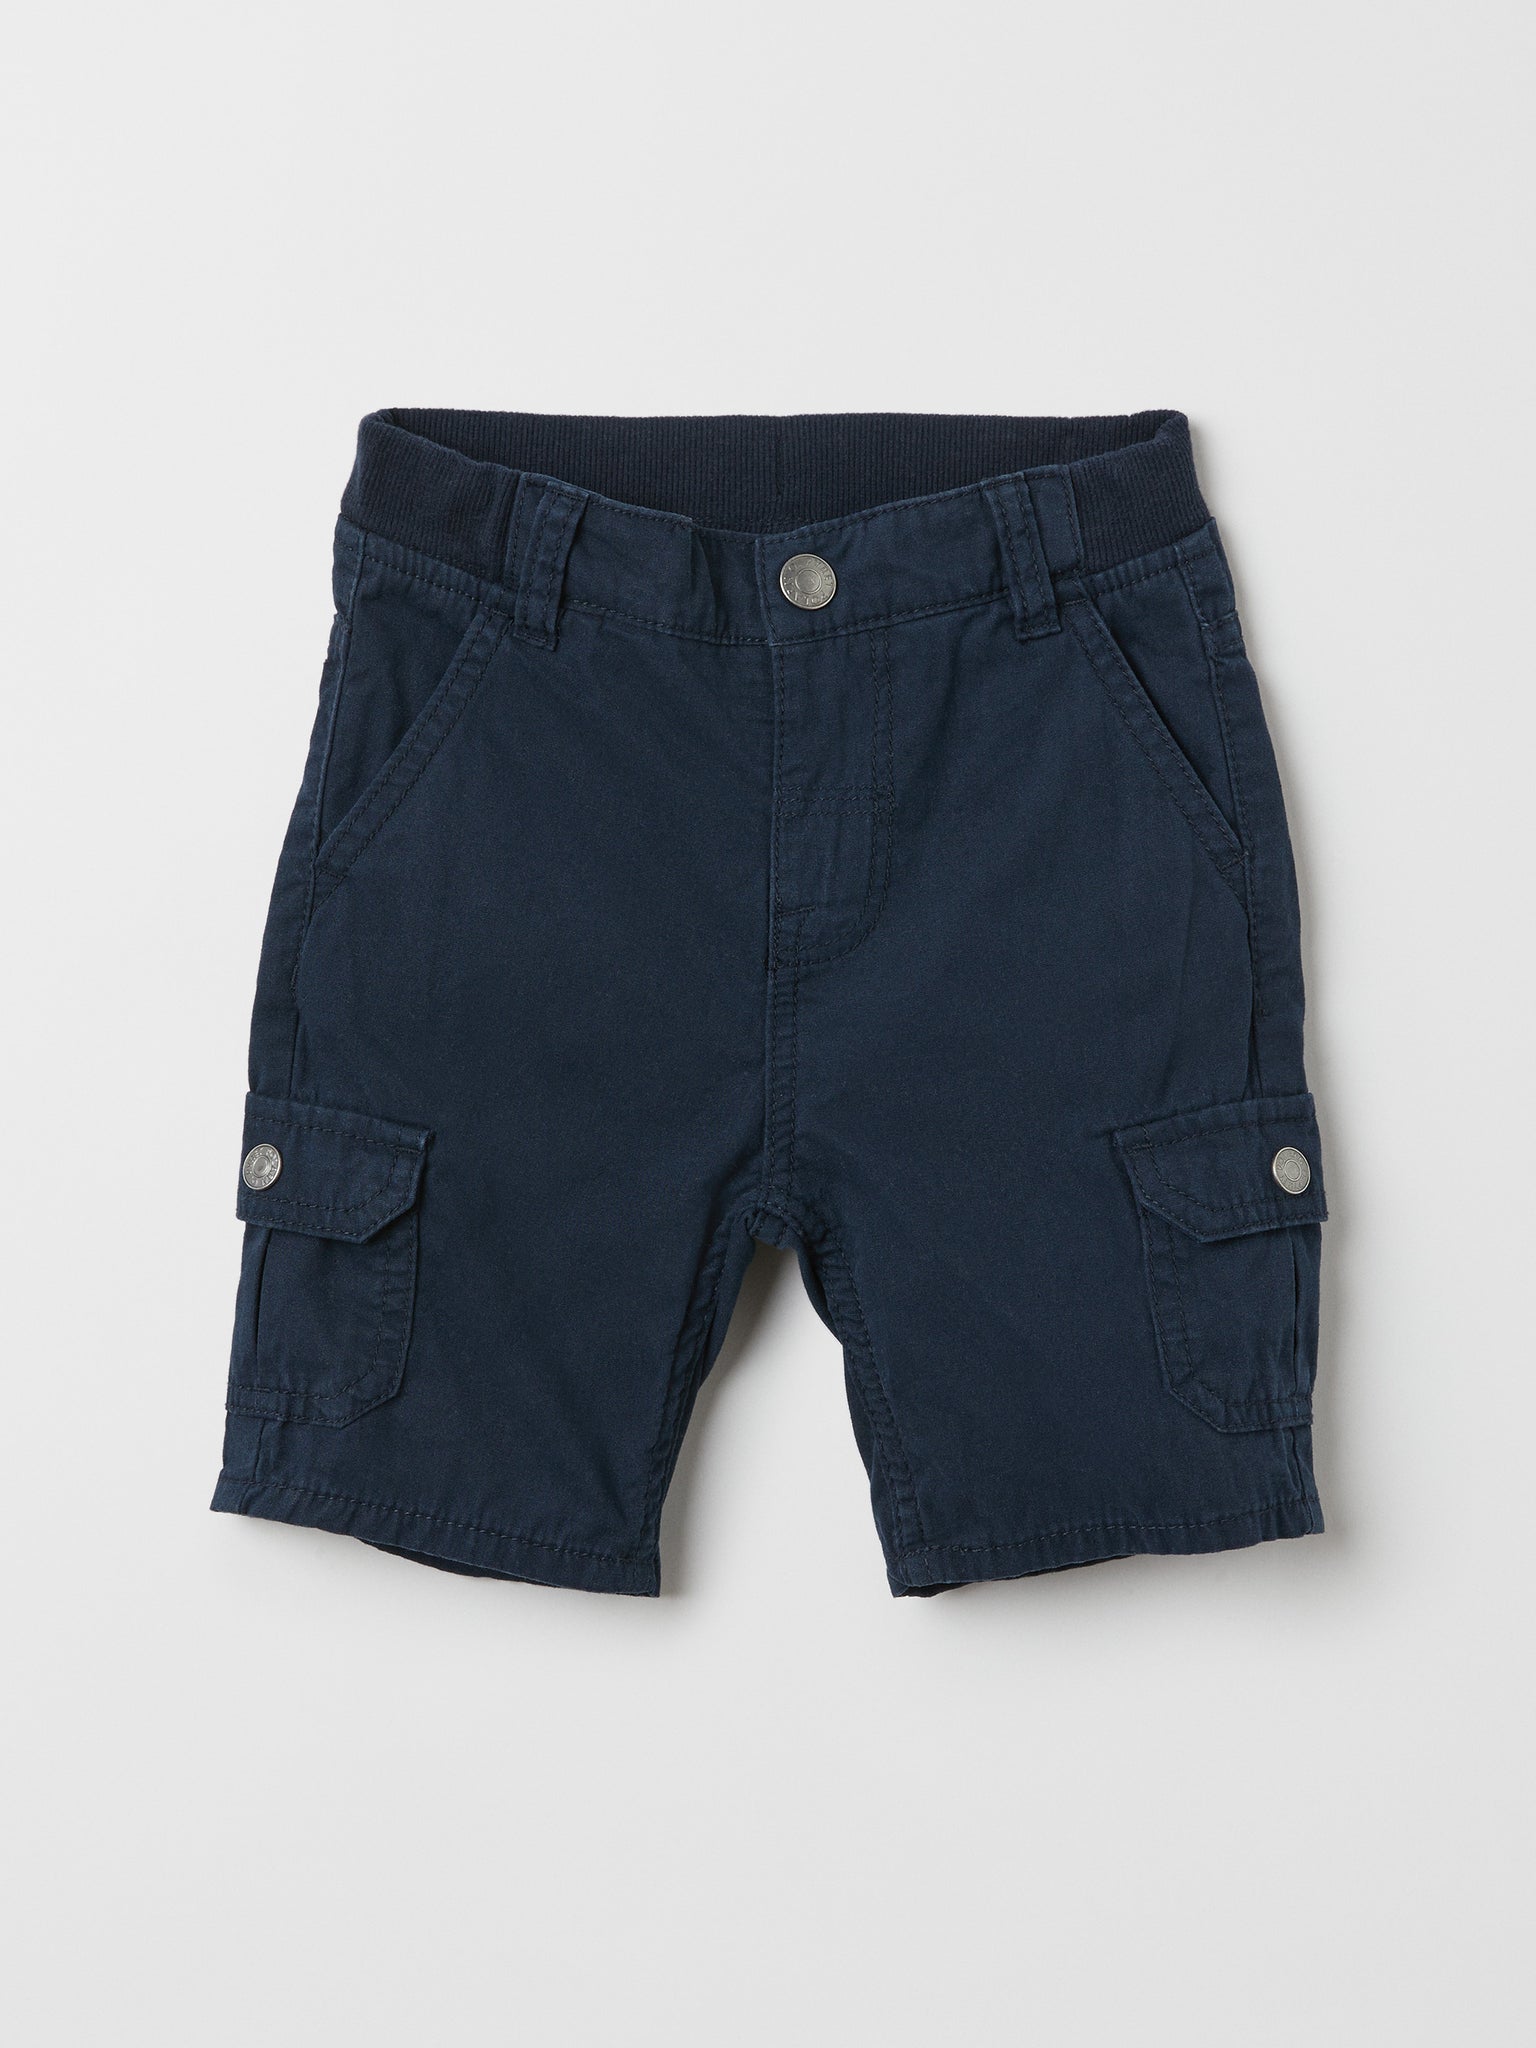 Organic Kids Cargo Shorts from the Polarn O. Pyret kidswear collection. Ethically produced kids clothing.